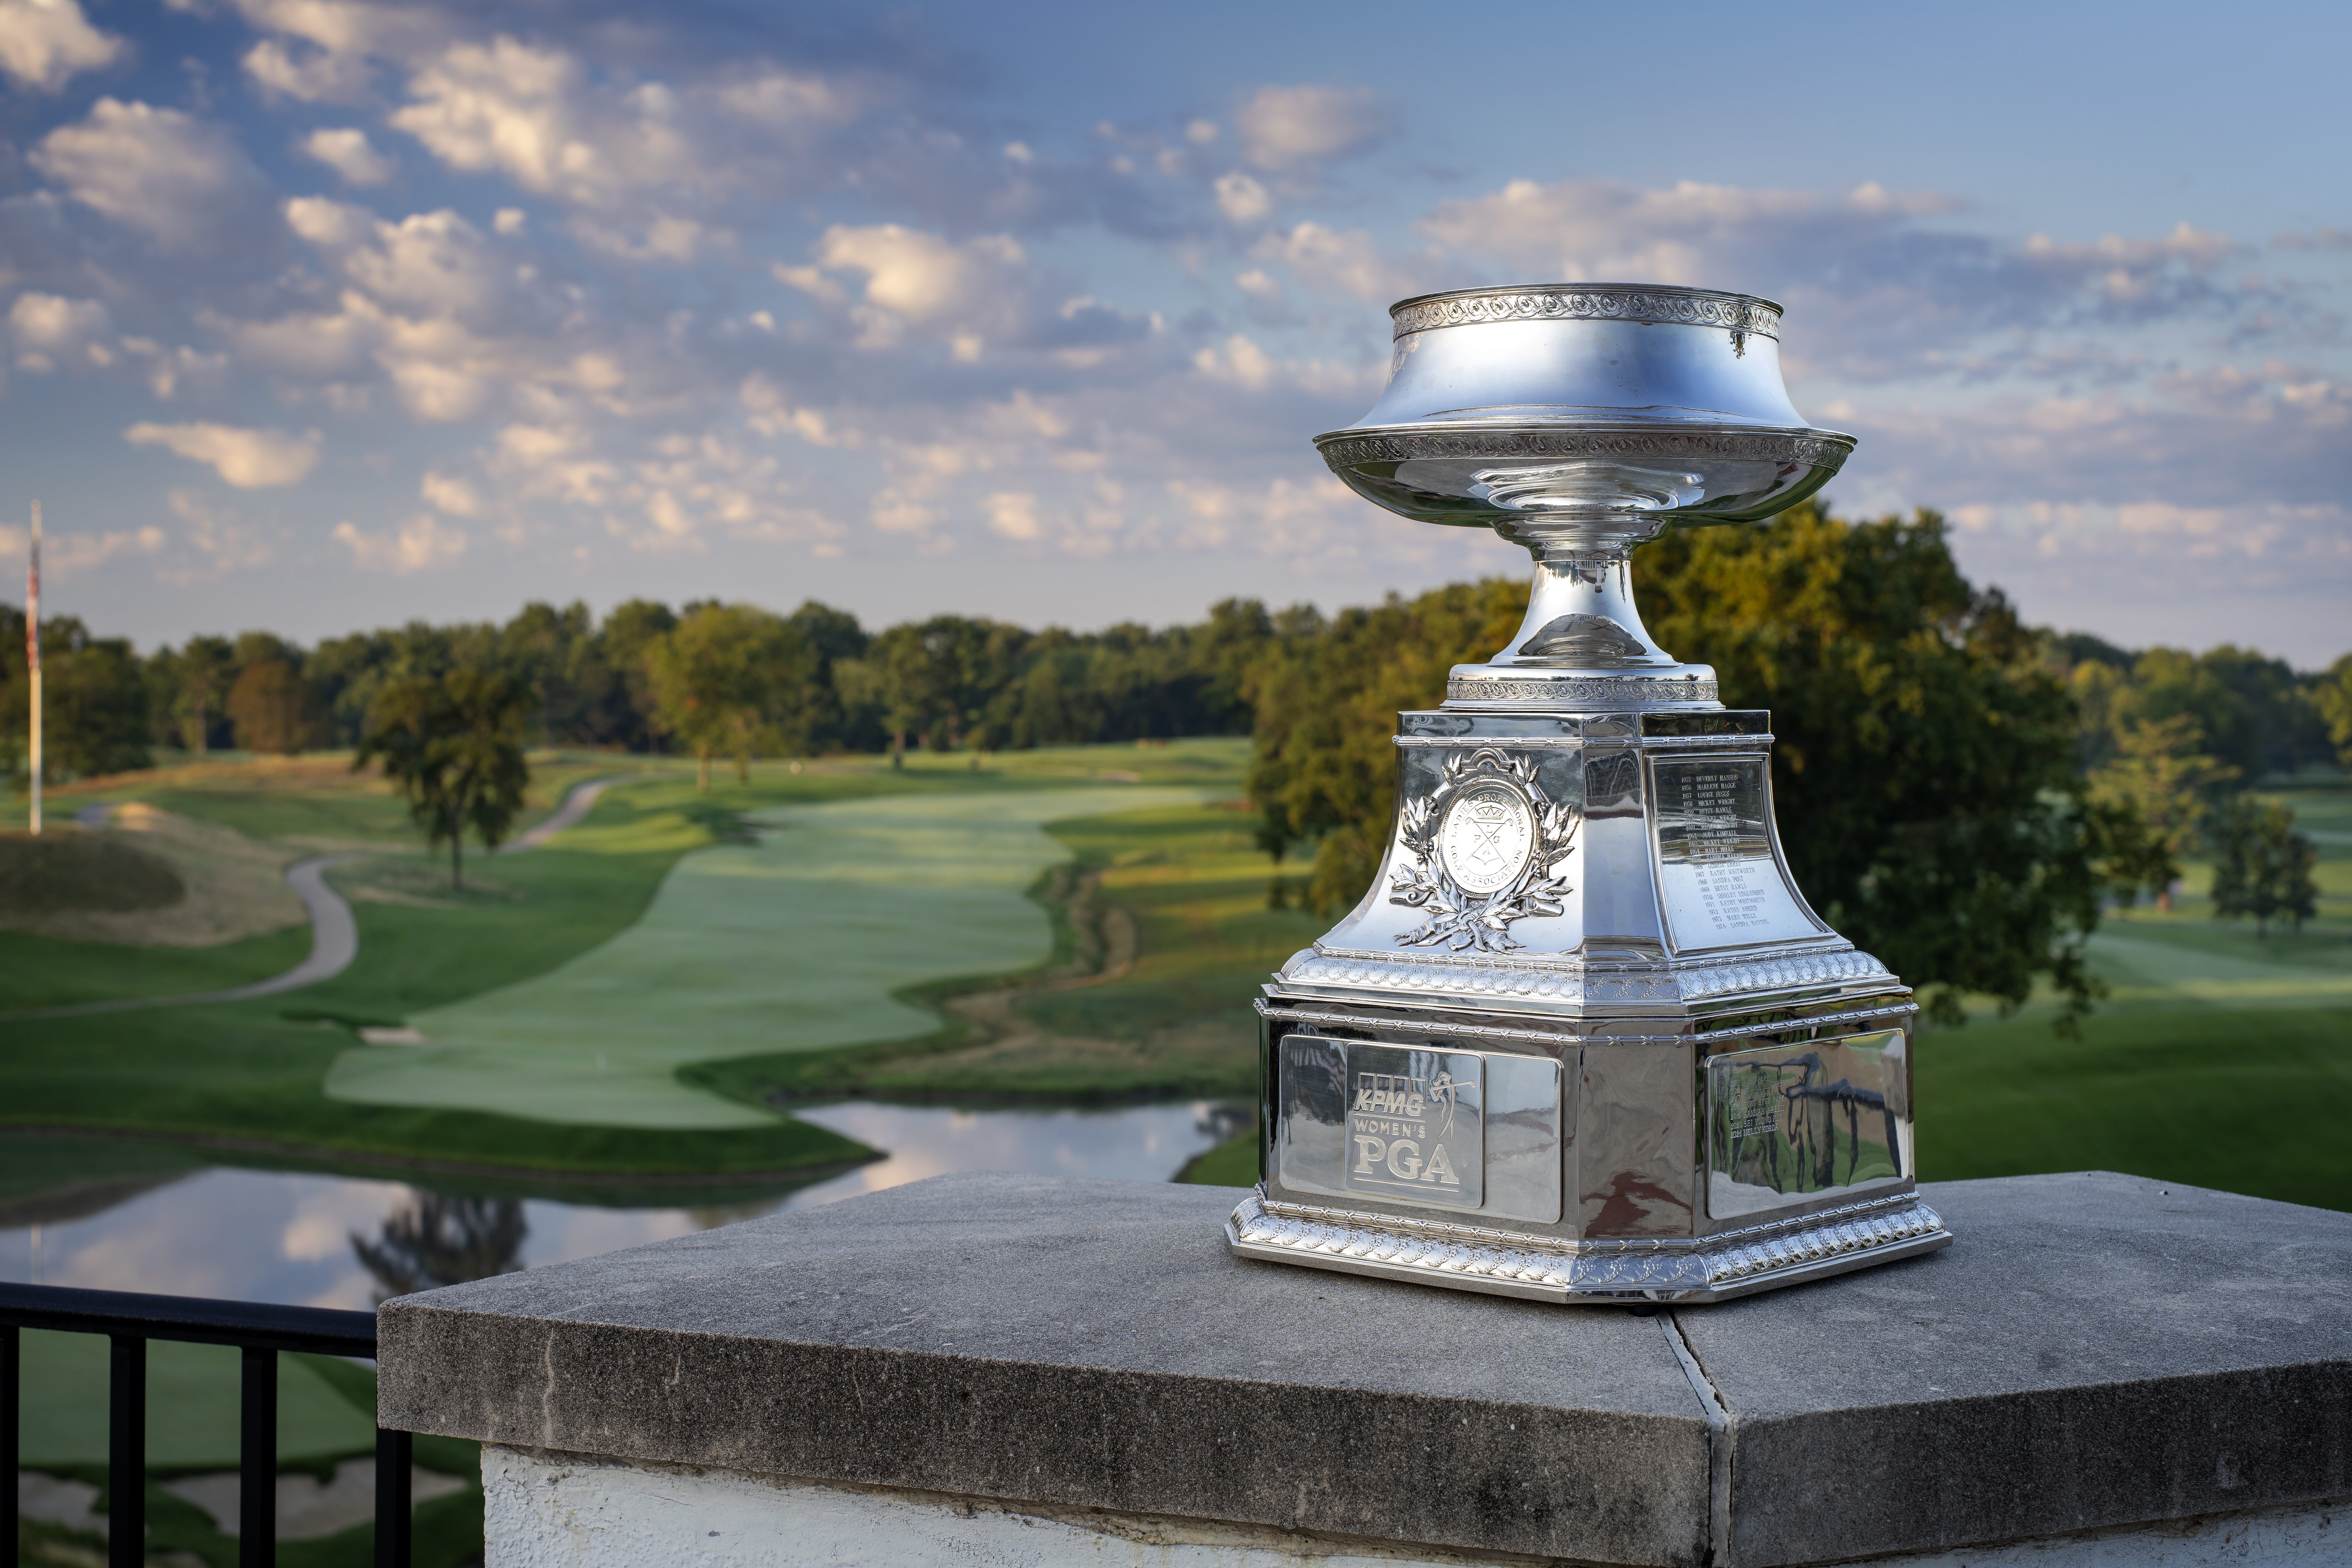 The KPMG Women's PGA Championship trophy on the 10th hole of the Congressional Country Club.